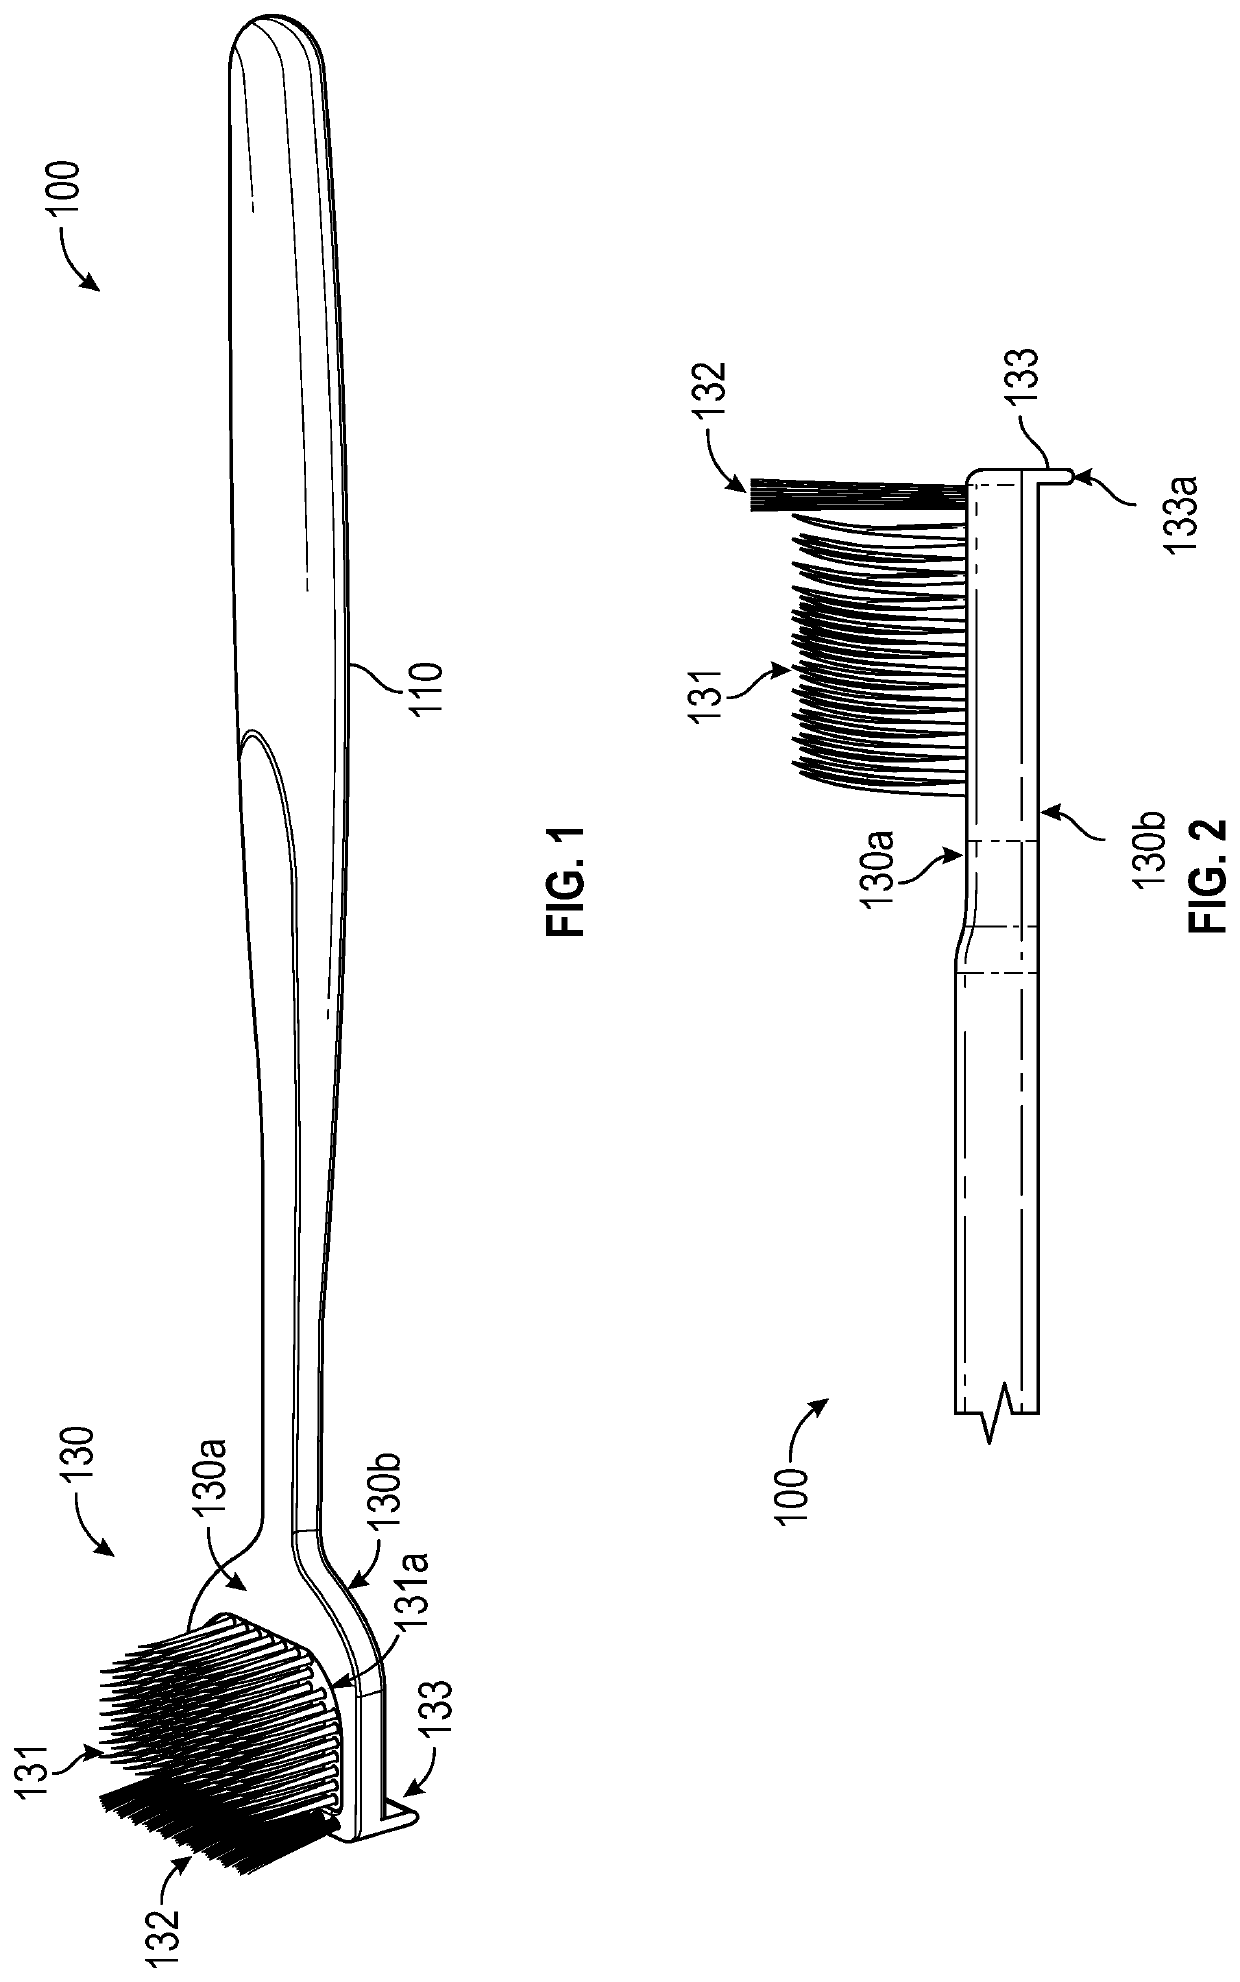 Tongue brush having bristles emanating from one surface and a tongue scraper emanating from an opposing surface